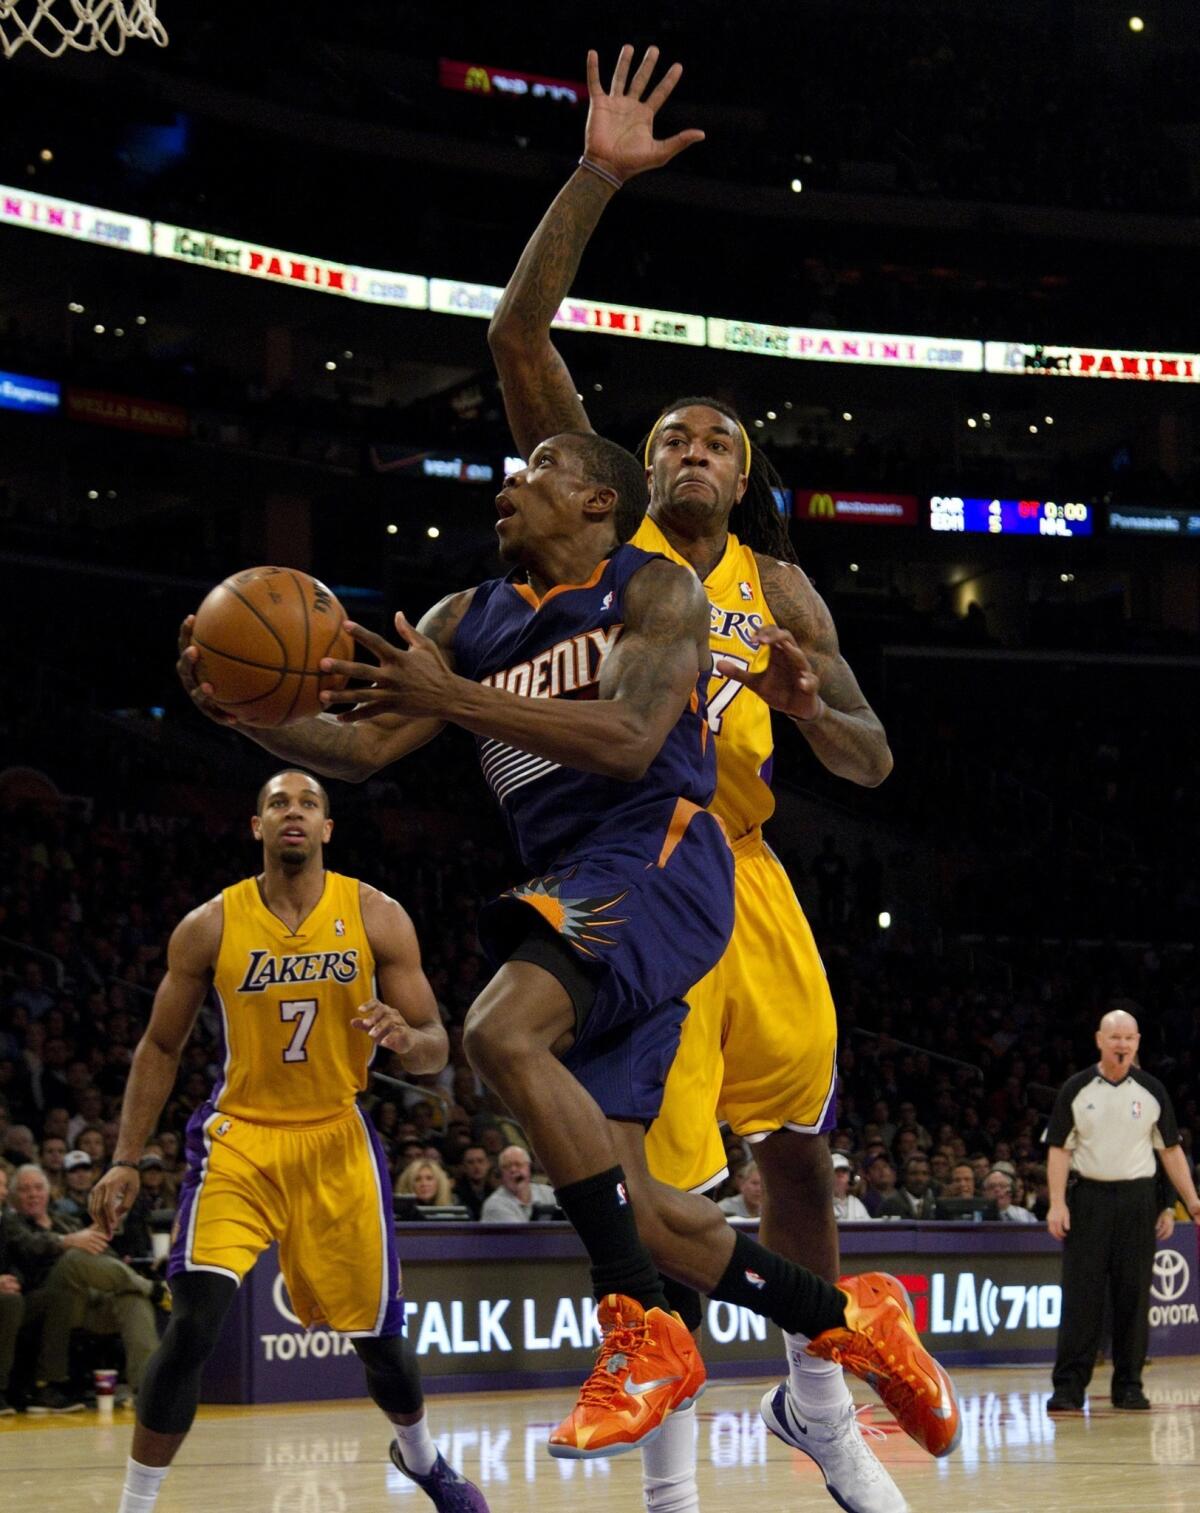 Phoenix Suns point guard Eric Bledsoe scores in front of Lakers center Jordan Hill during the Lakers' 114-108 loss Tuesday at Staples Center.